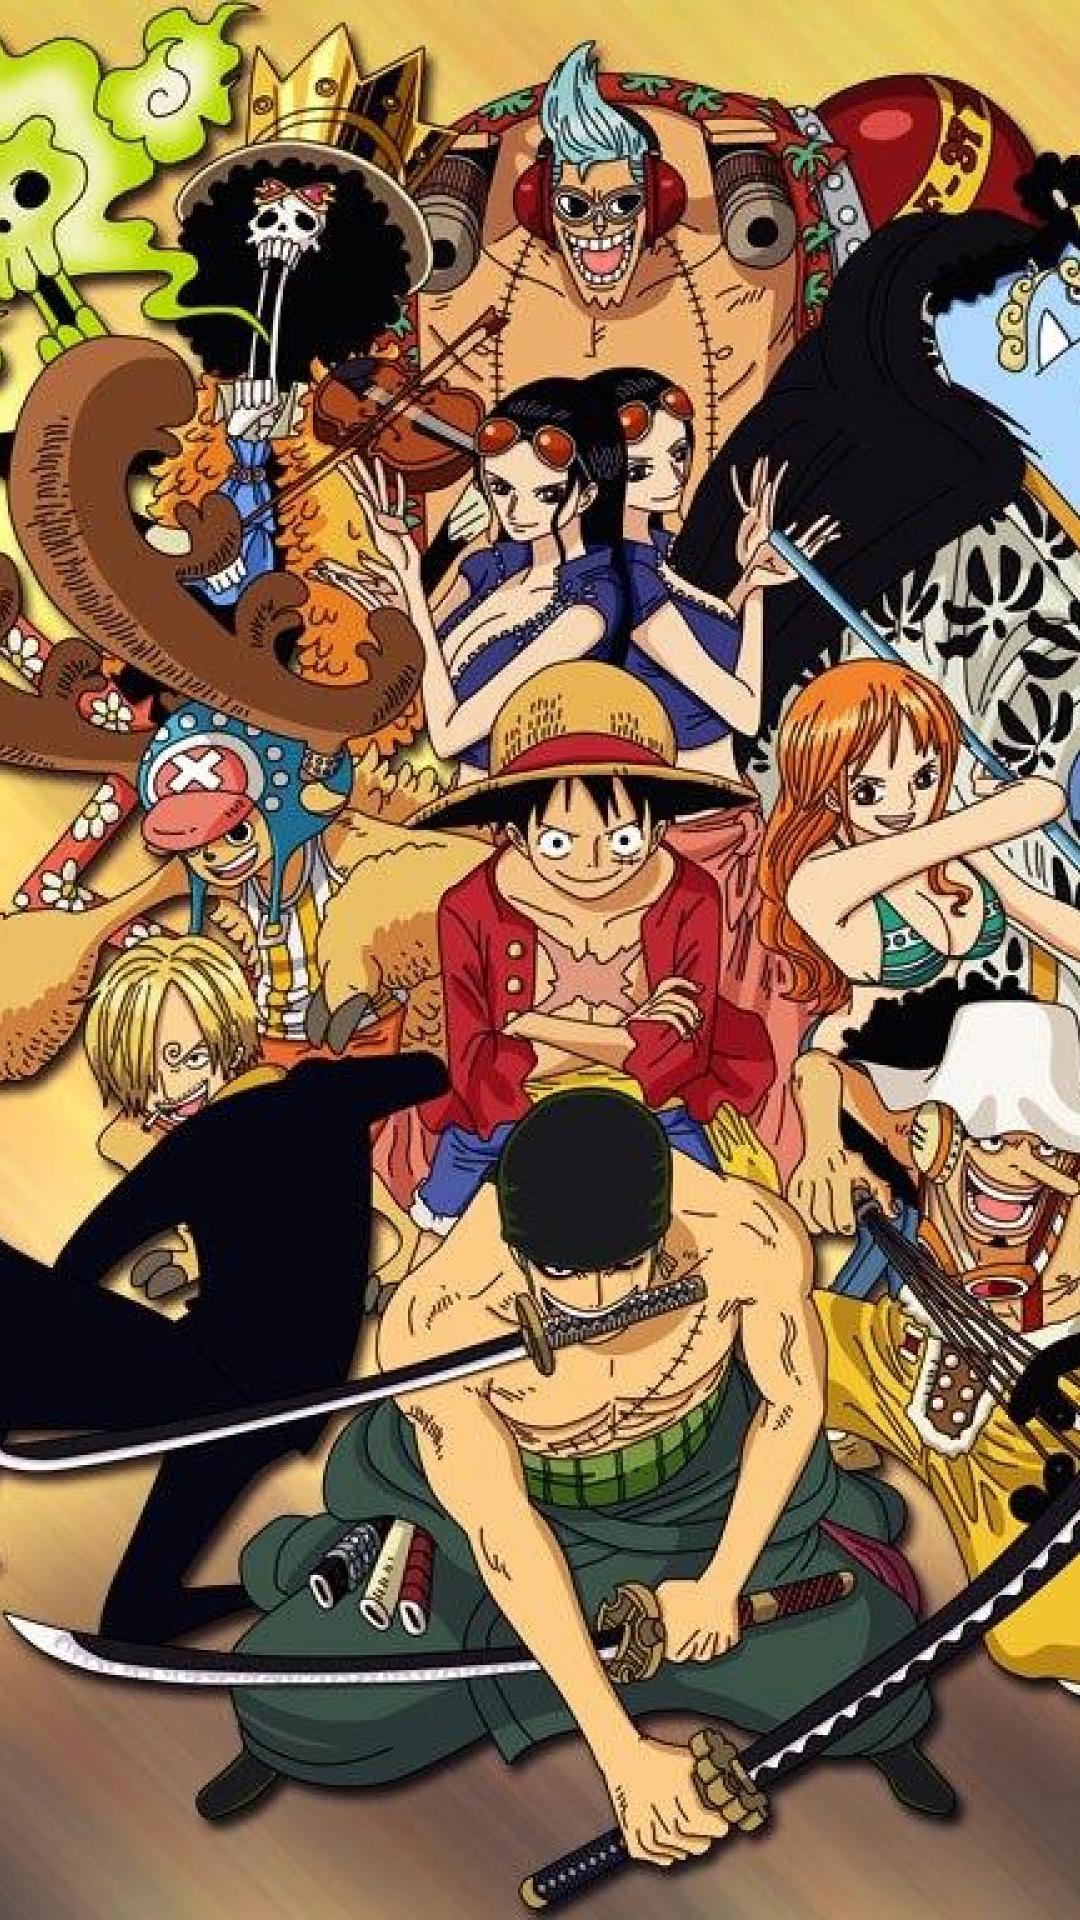 1080 x 1920 · jpeg - One Piece Wallpaper iPhone (79+ images)